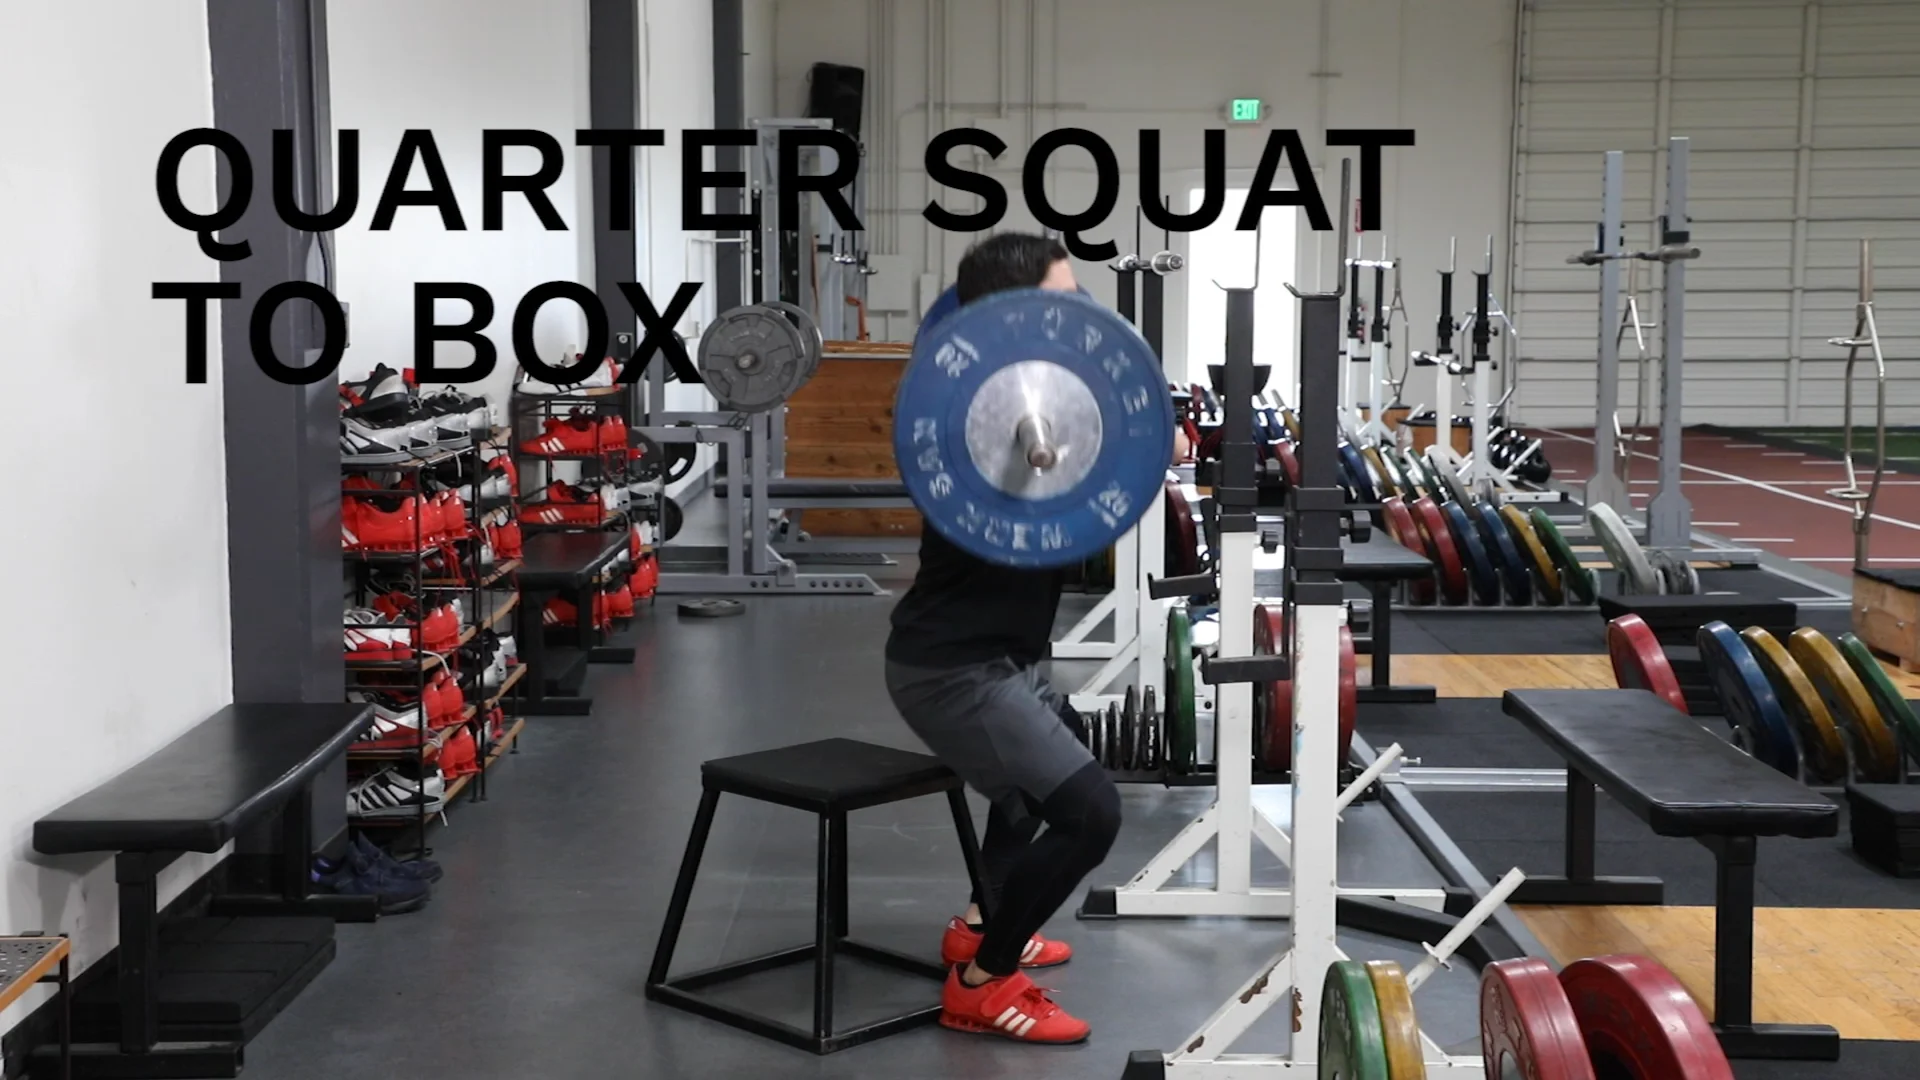 Dumbbell box squat instructions and videos